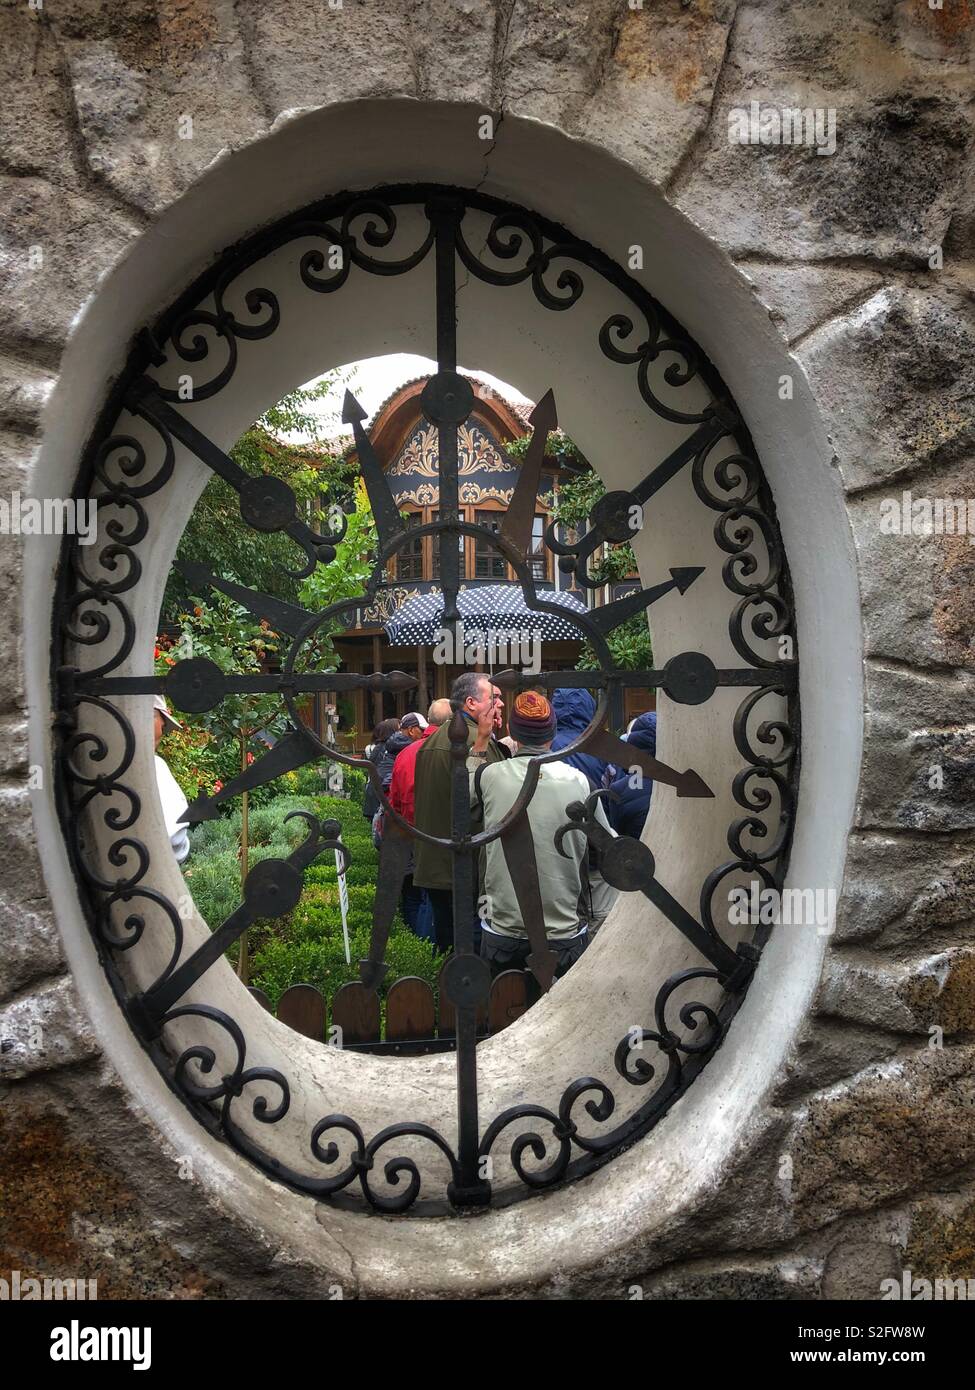 Looking through a window carved into a stone wall. Stock Photo